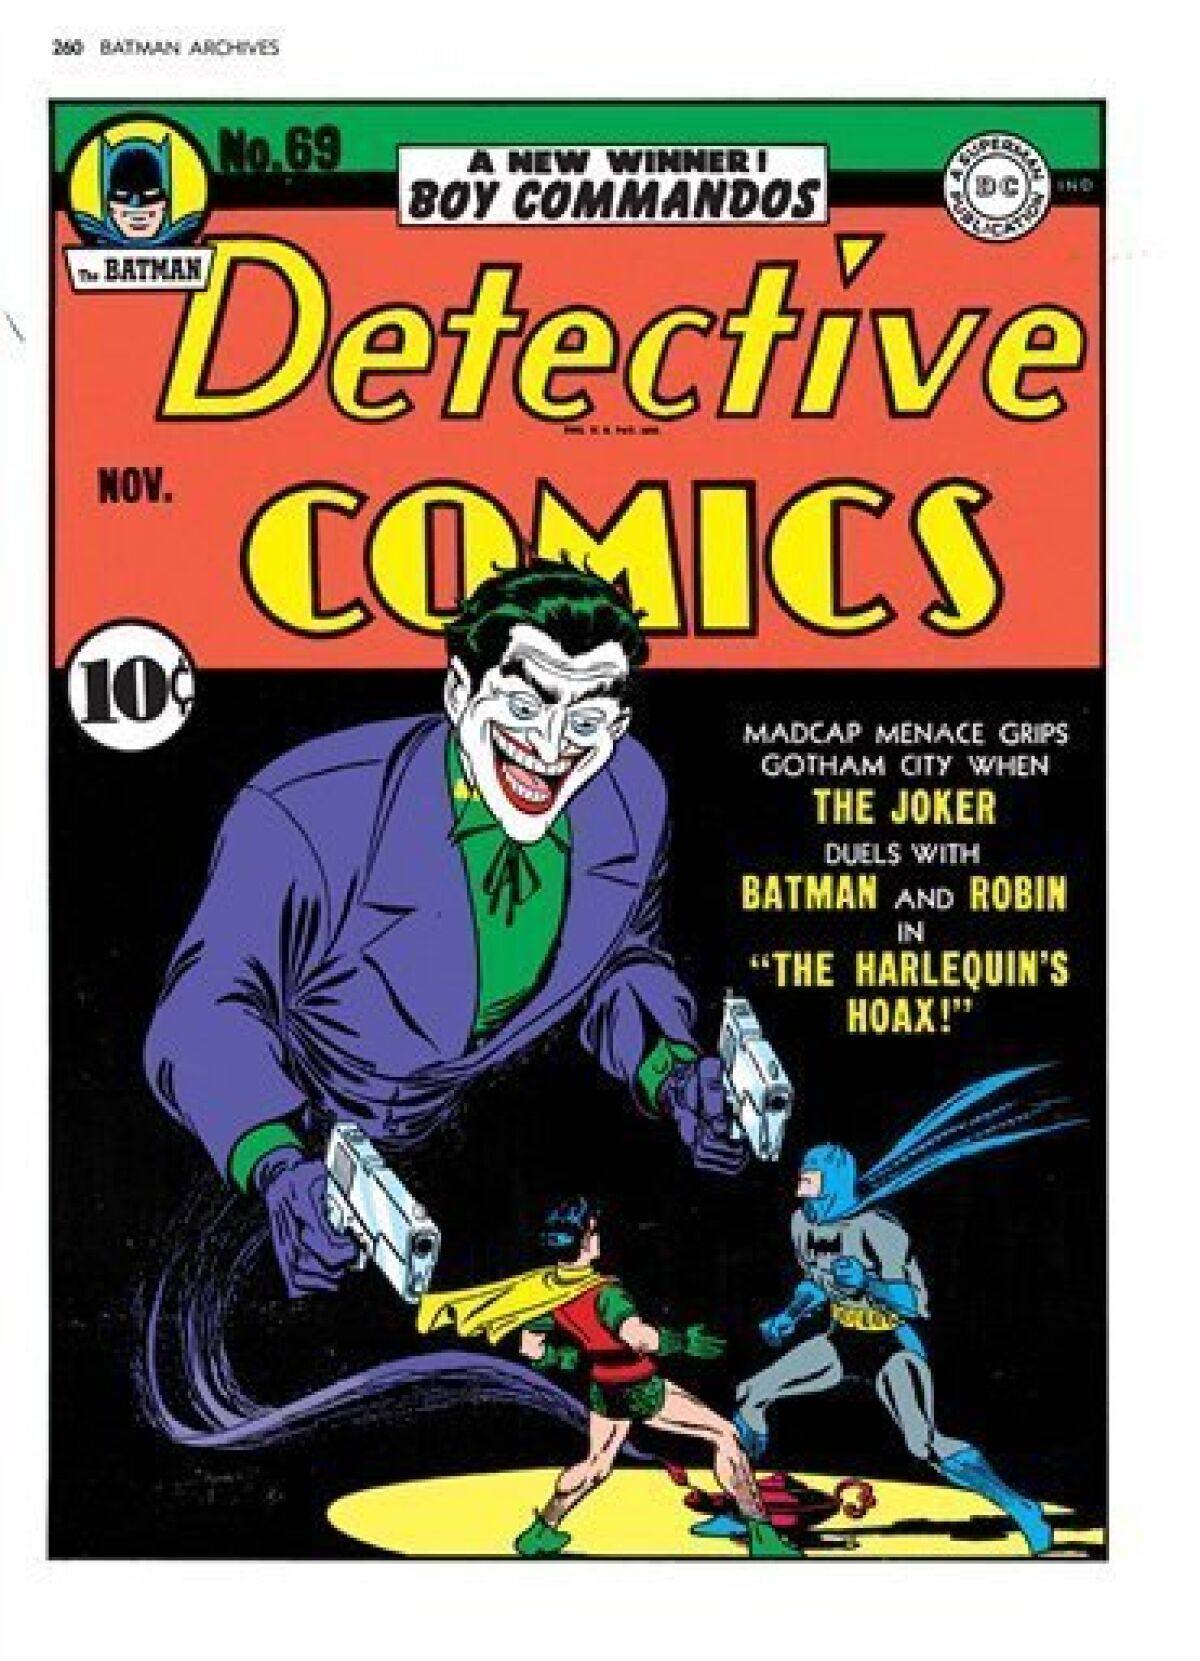 In this undated photo provided by DC Comics, the issue 69 cover of "The Batman Detective Comics" is shown. Jerry Robinson, the artist who helped create "The Joker" in the Batman series has died on Wednesday, Dec. 7, 2011 in New York City. He was 89. (AP Photo/DC Comics, Jerry Robinson)